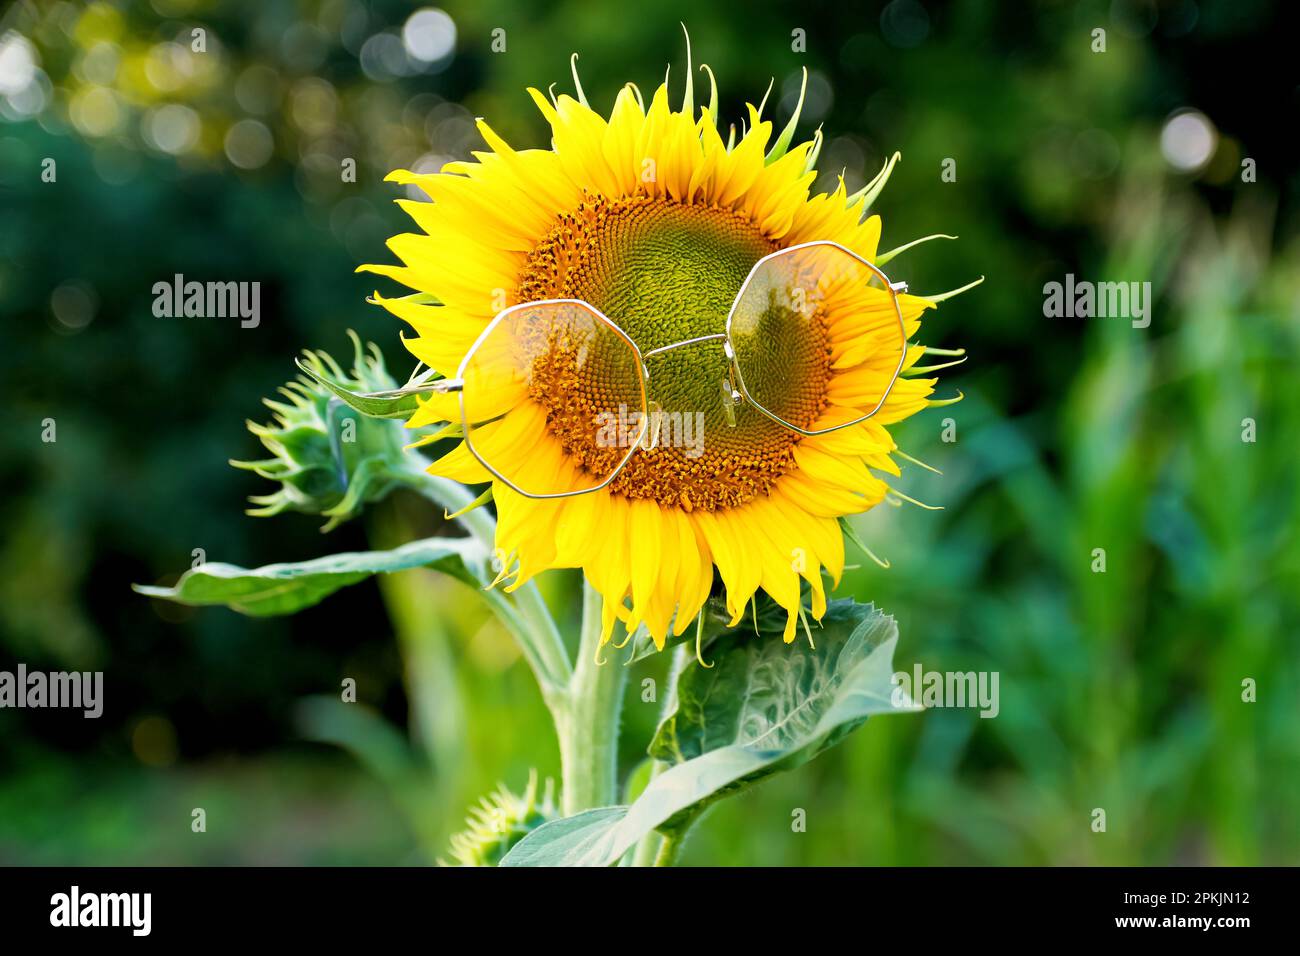 Sunflower wearing yellow sunglasses. Summer funny background. Beautiful sunflower on a sunny day with a green natural background. Hello summer. Stock Photo